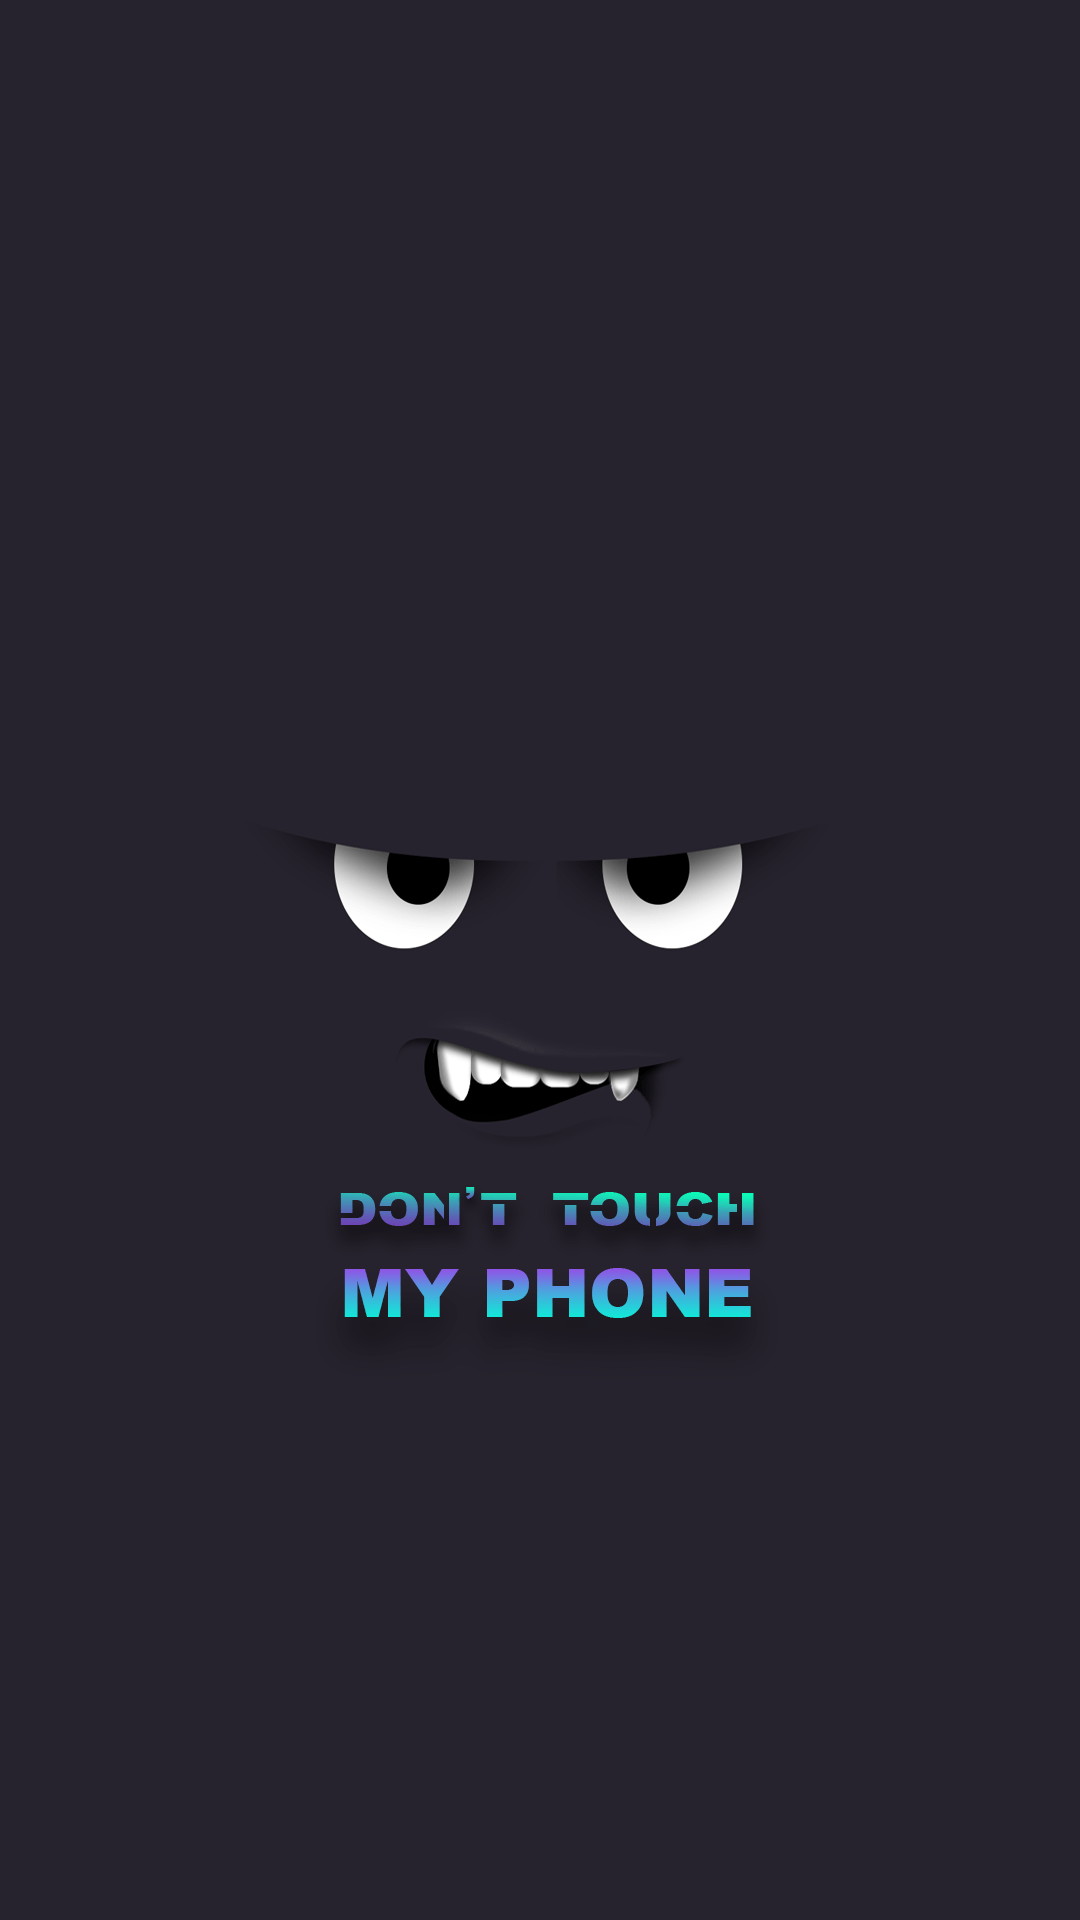 Don't touch my phone #kaypee. Funny phone wallpaper, Dont touch